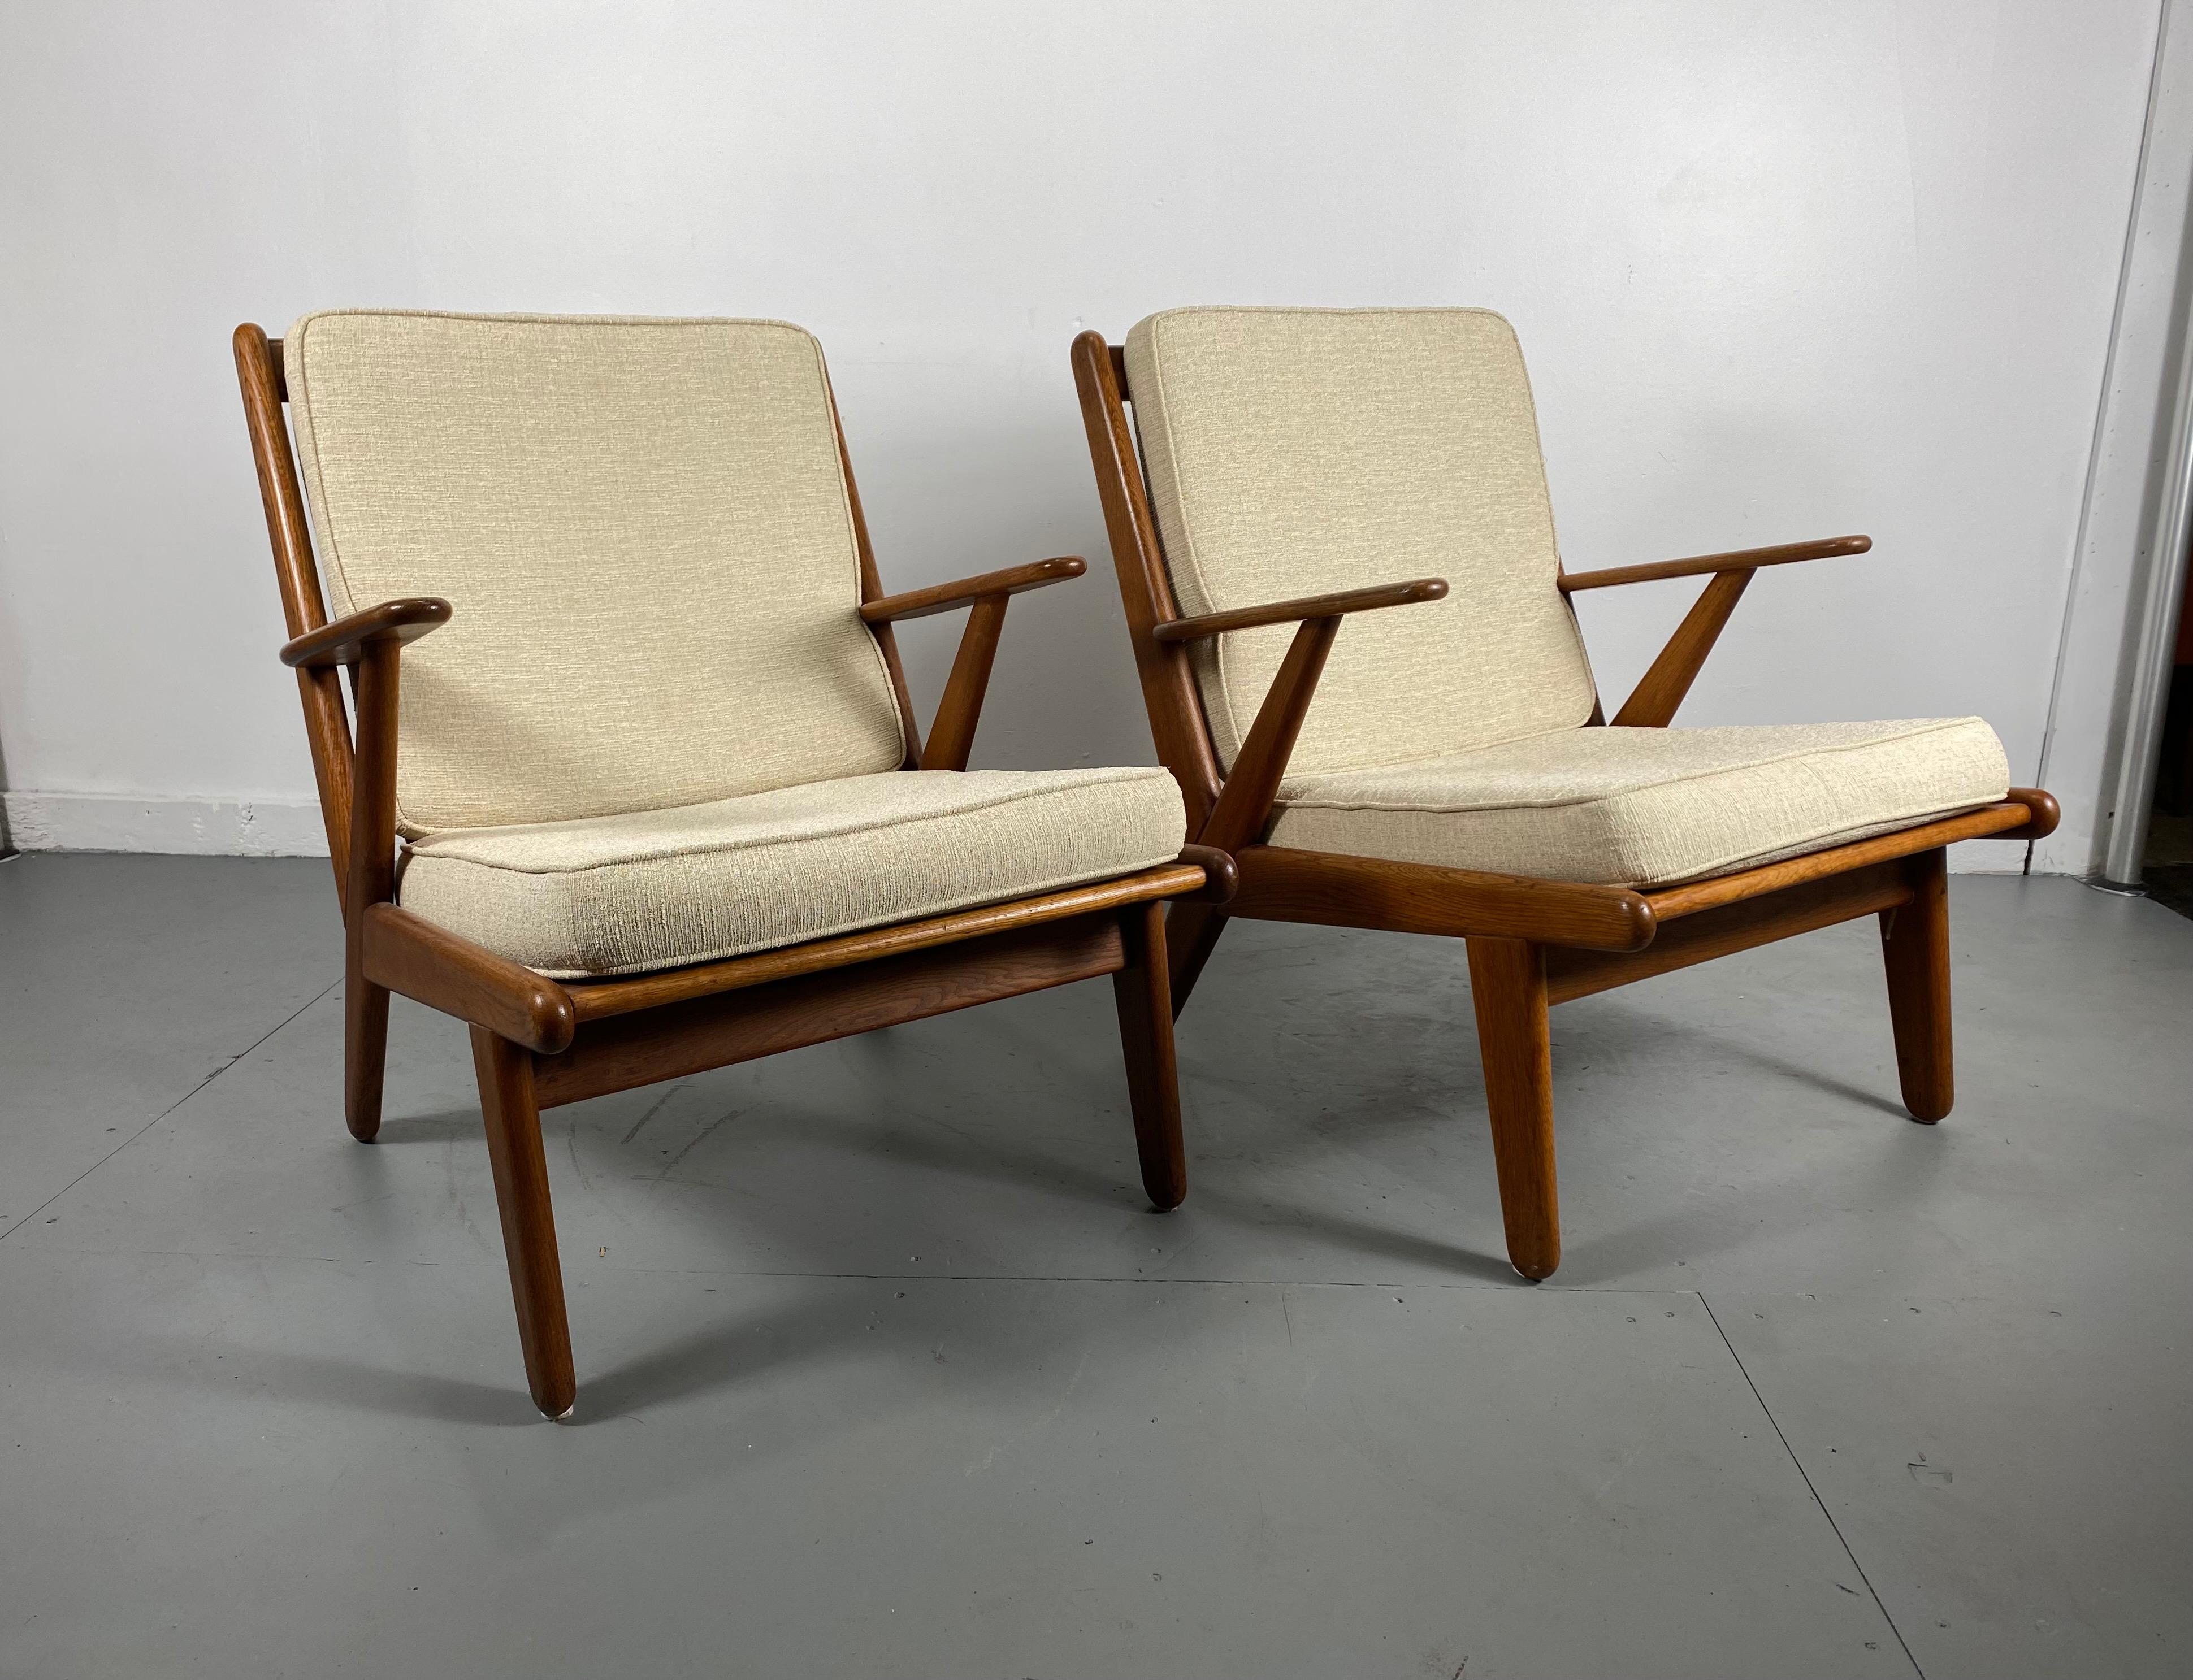 Solid Teak Danish Modernist Lounge Chairs designed by Poul Volther / Denmark 4